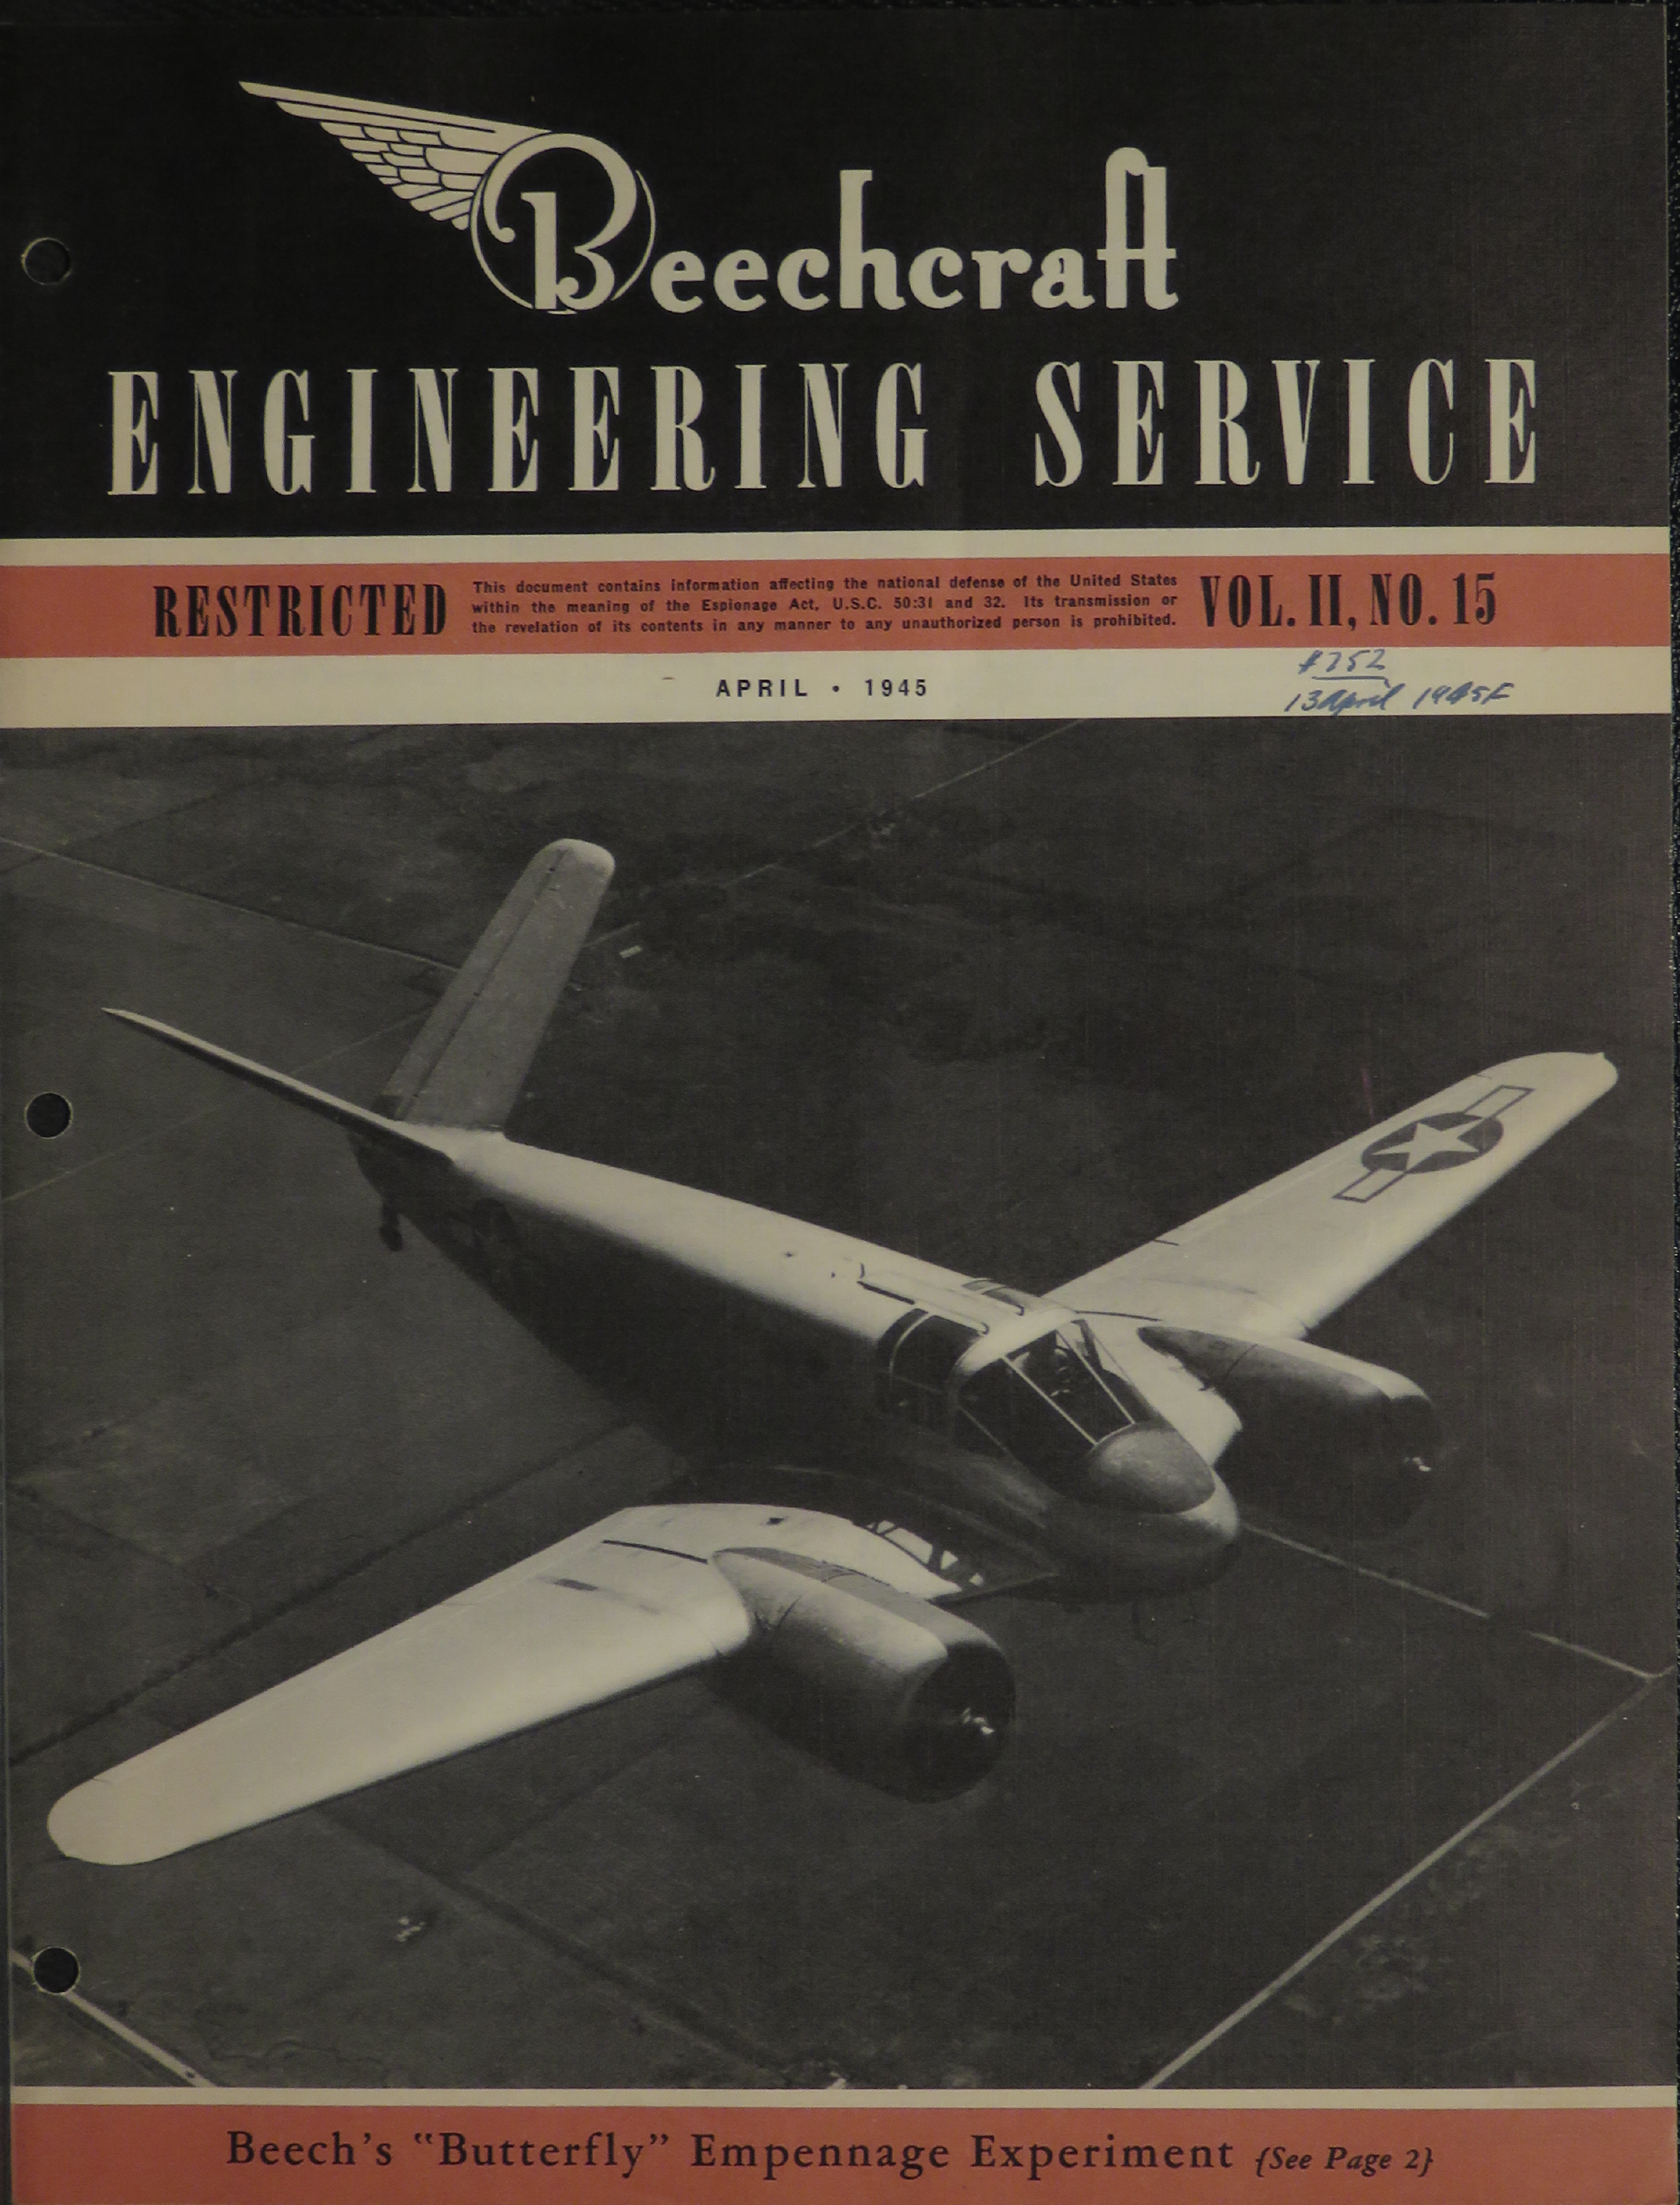 Sample page 1 from AirCorps Library document: Vol. II, No. 15 - Beechcraft Engineering Service